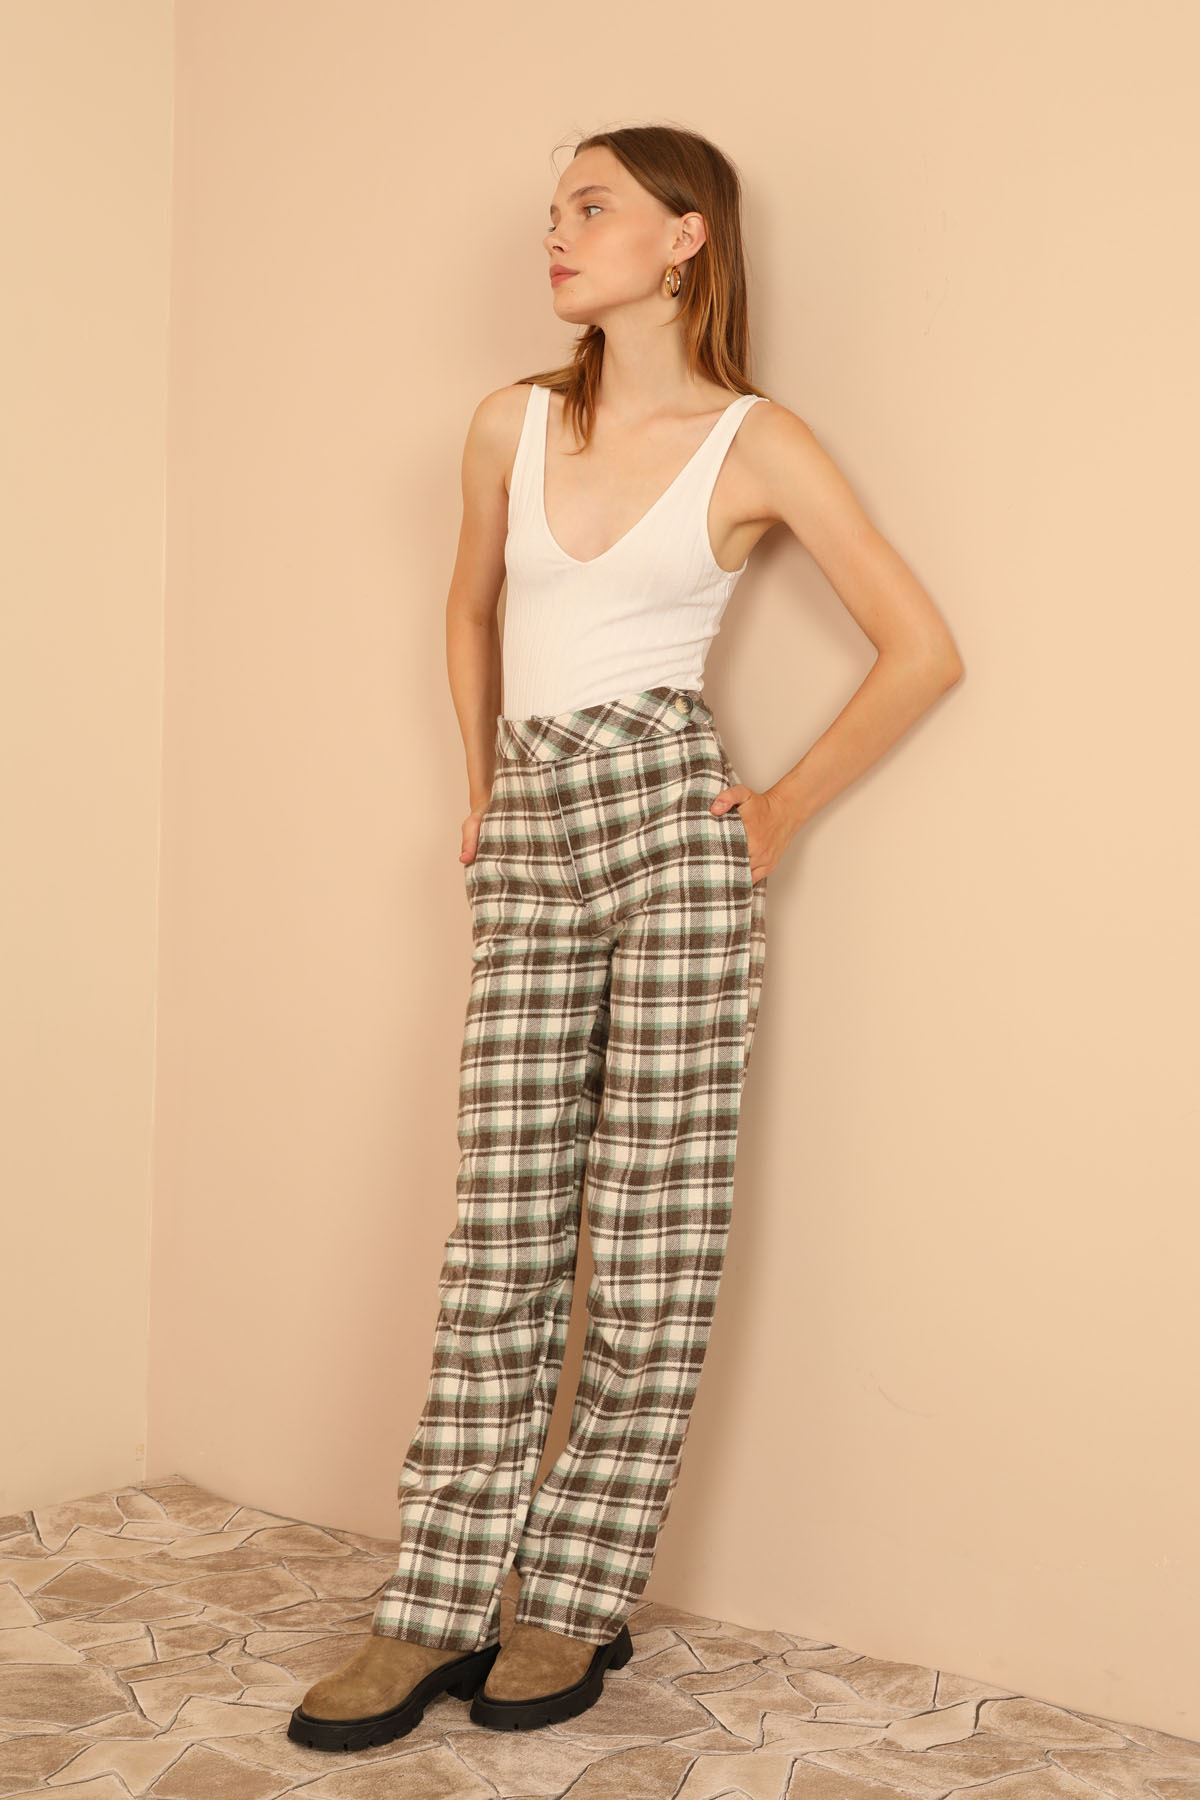 Plaid Fabric Comfy Fit Women'S Trouser - Brown